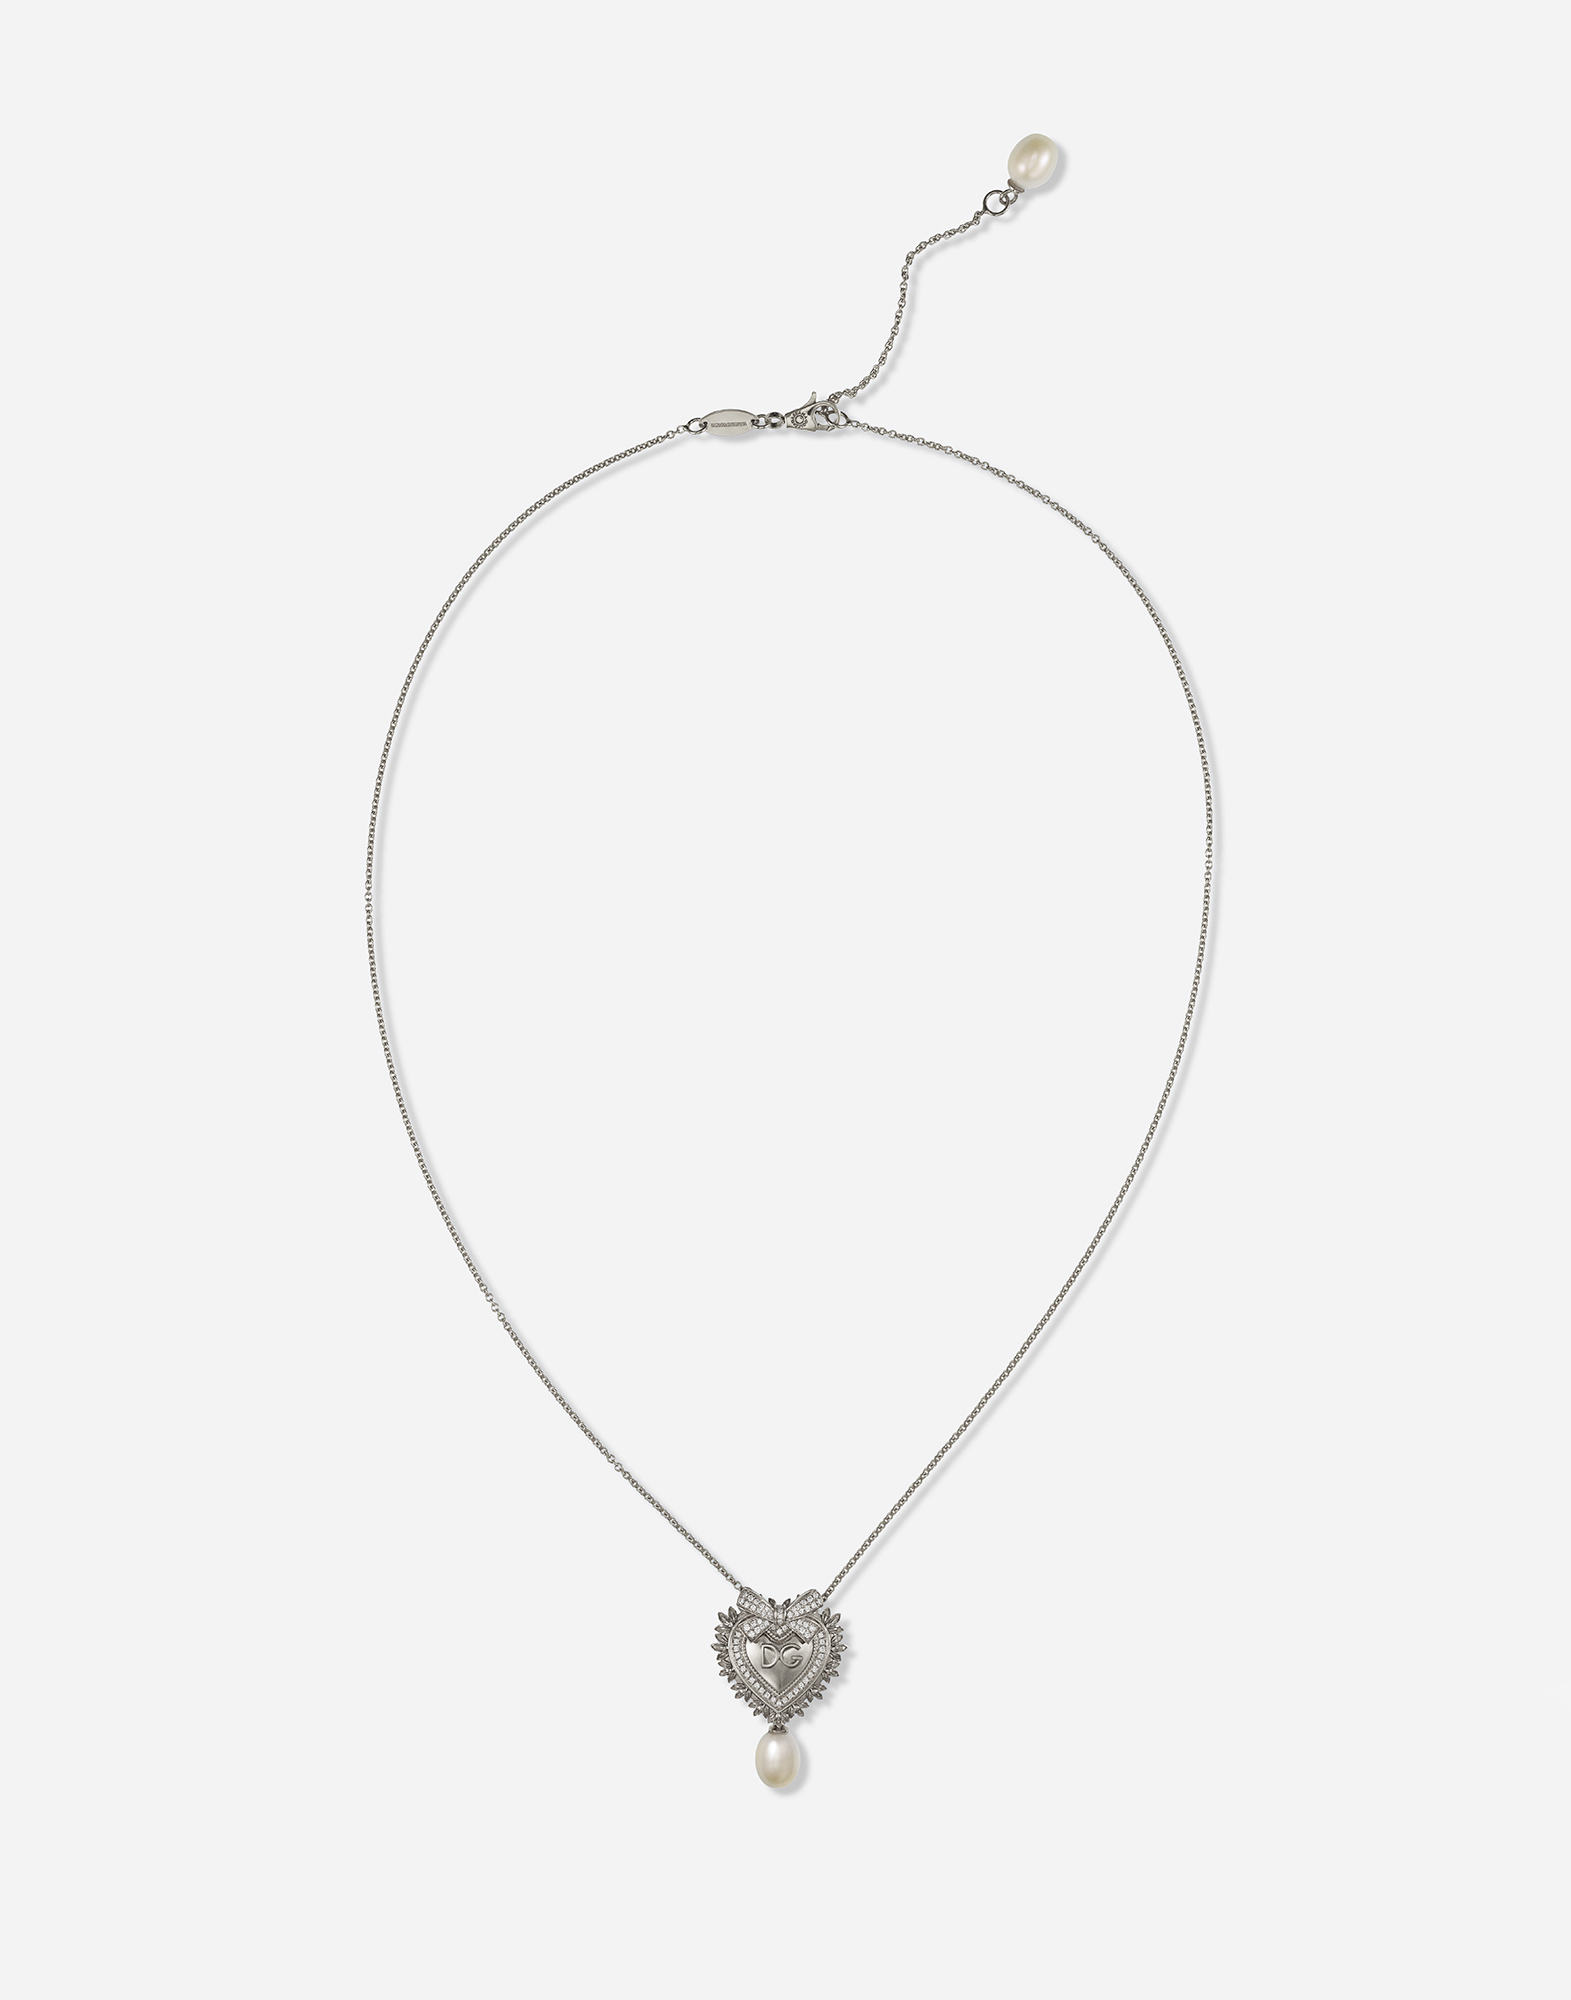 Dolce & Gabbana Devotion Necklace In White Gold With Diamonds And Pearls White Gold Female Onesize